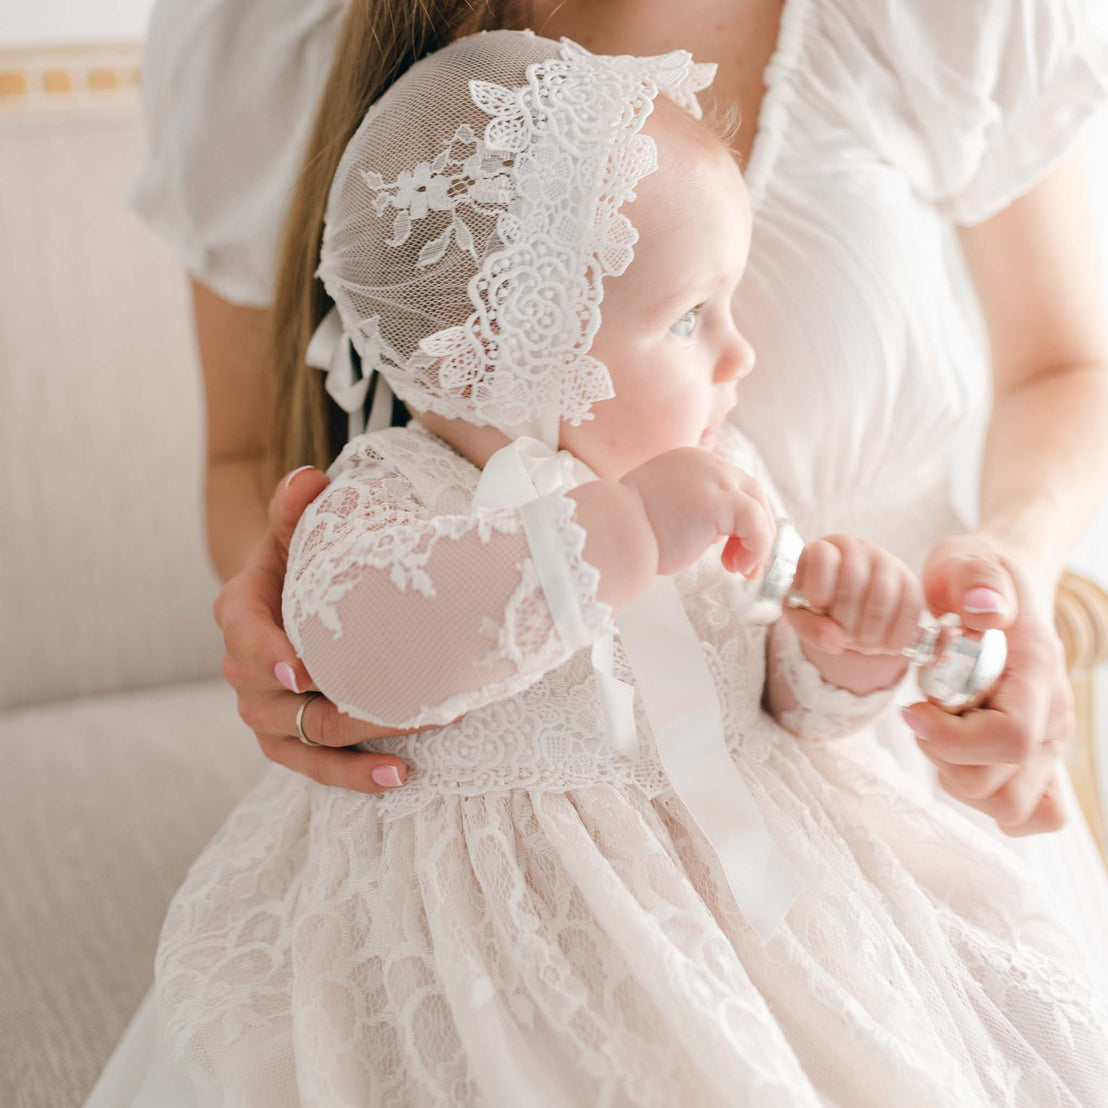 A mother in a white lace dress gently holds her baby, dressed in a Juliette Christening Gown & Bonnet, focusing tenderly on her child.